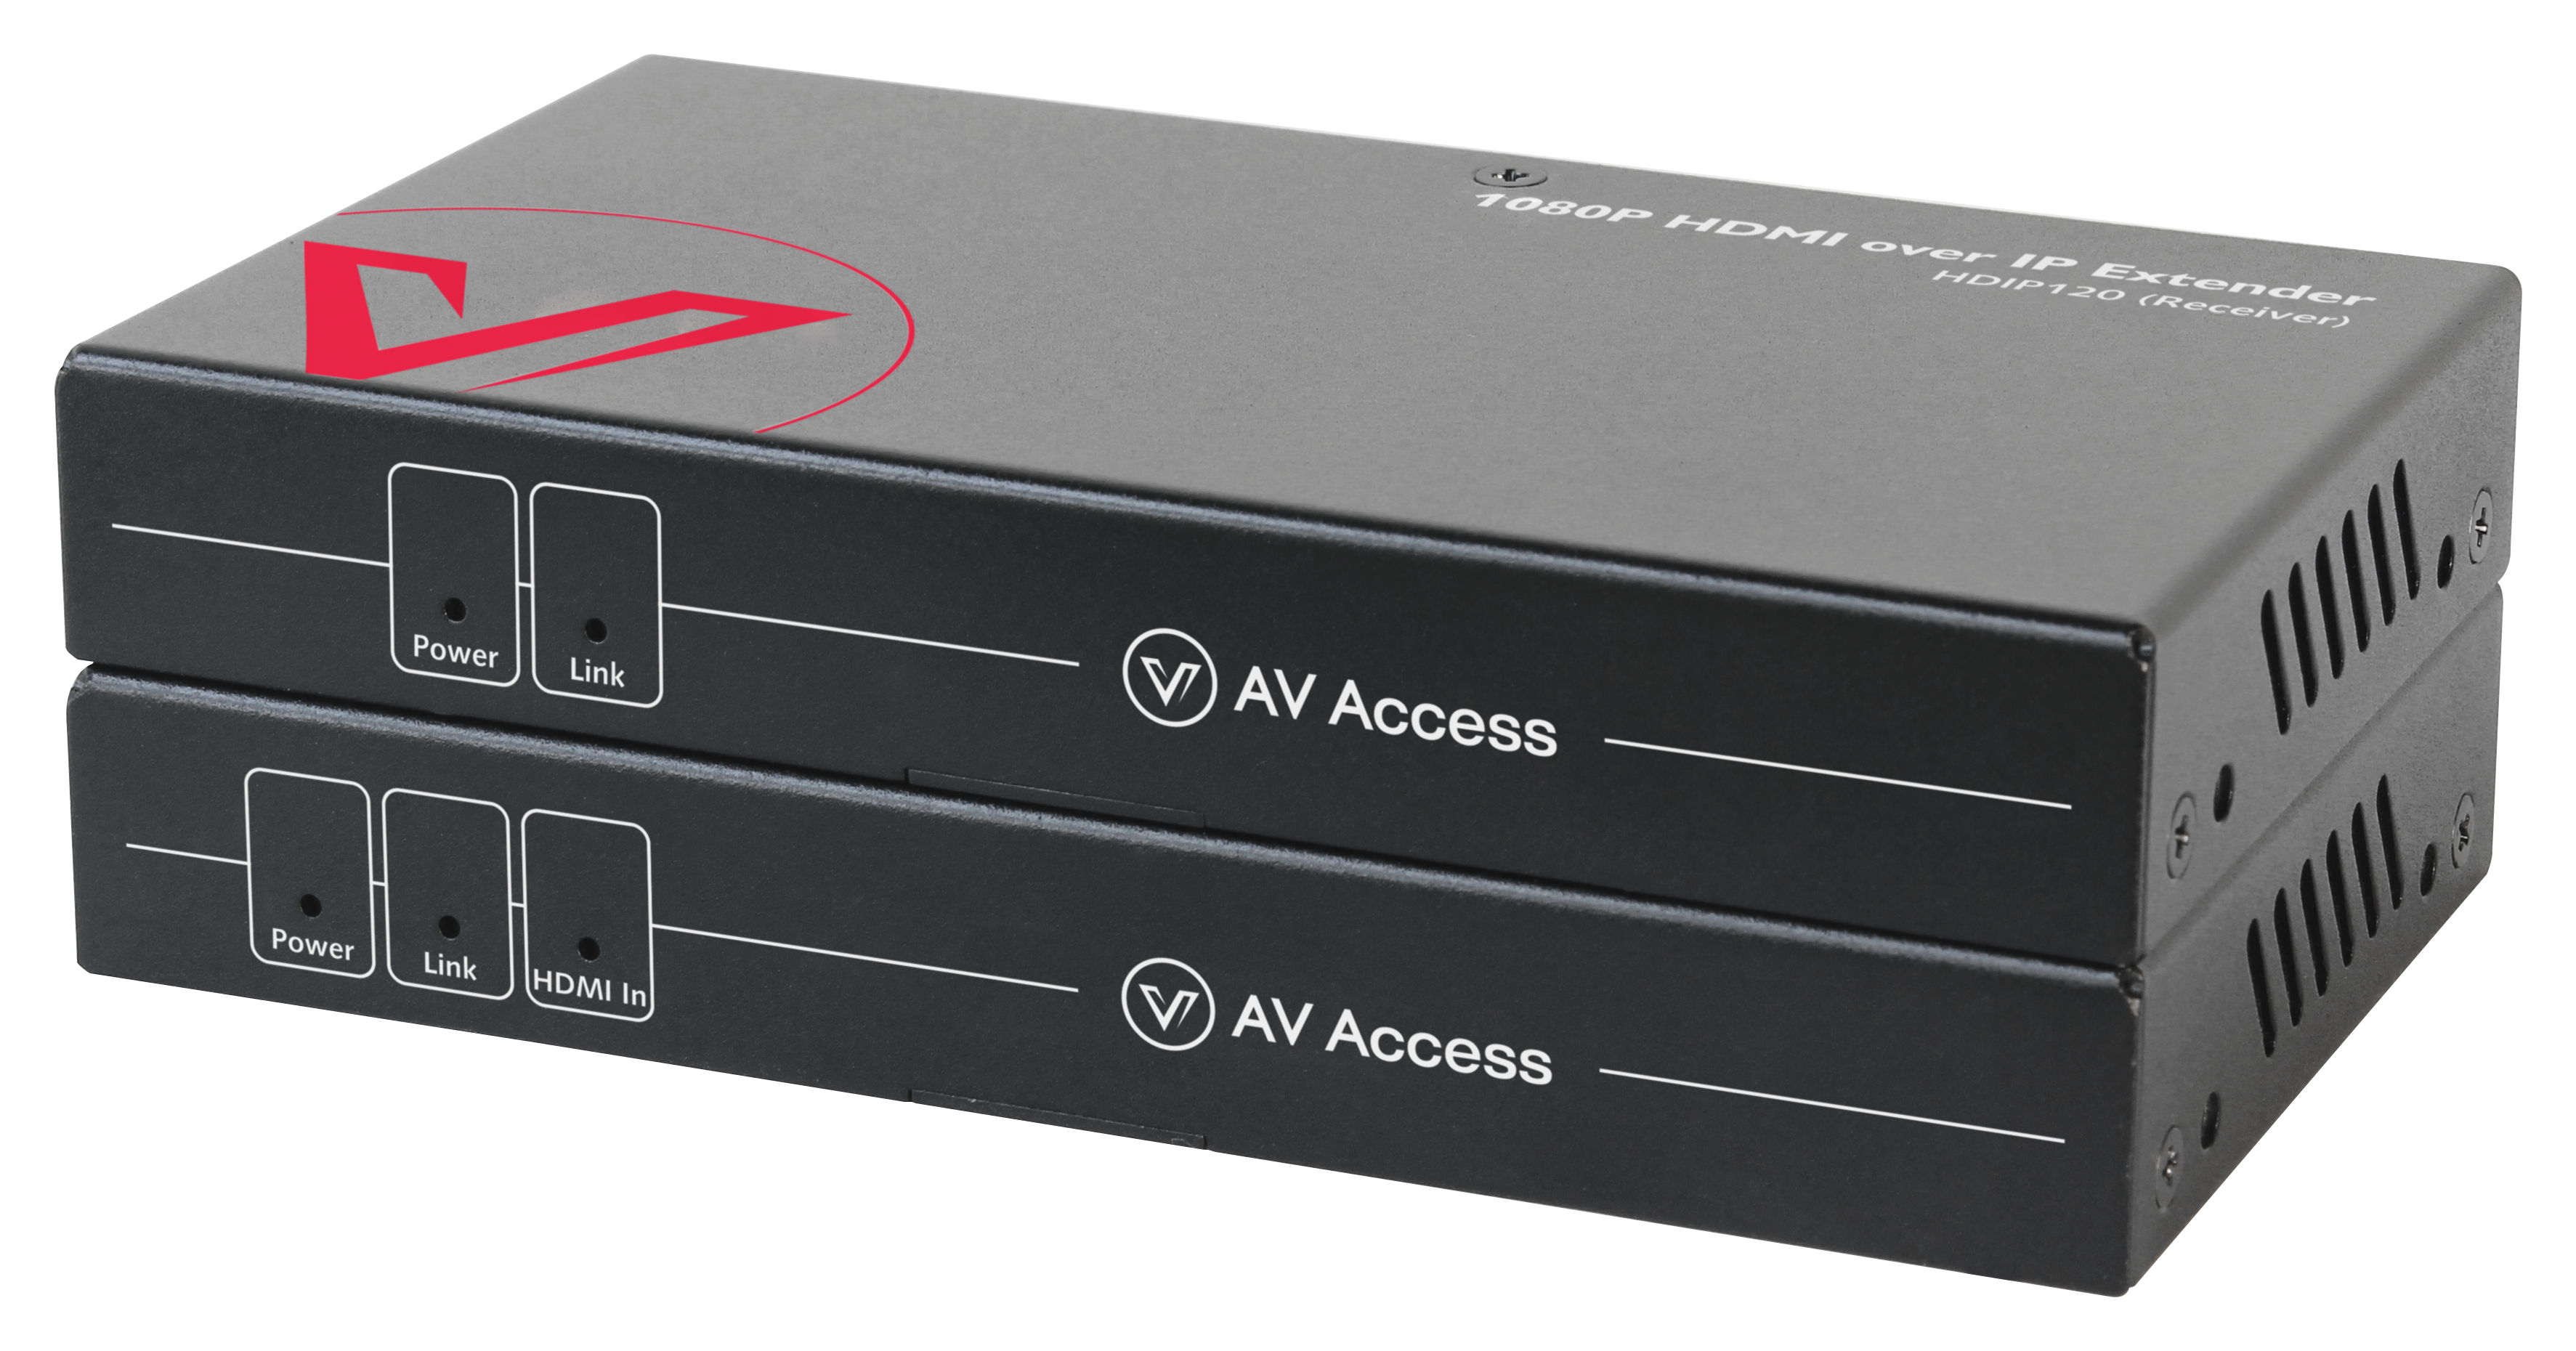 AV Access Launches a New AV over IP Kit to Help Build an Extender Splitter Combo in Home and Business Applications